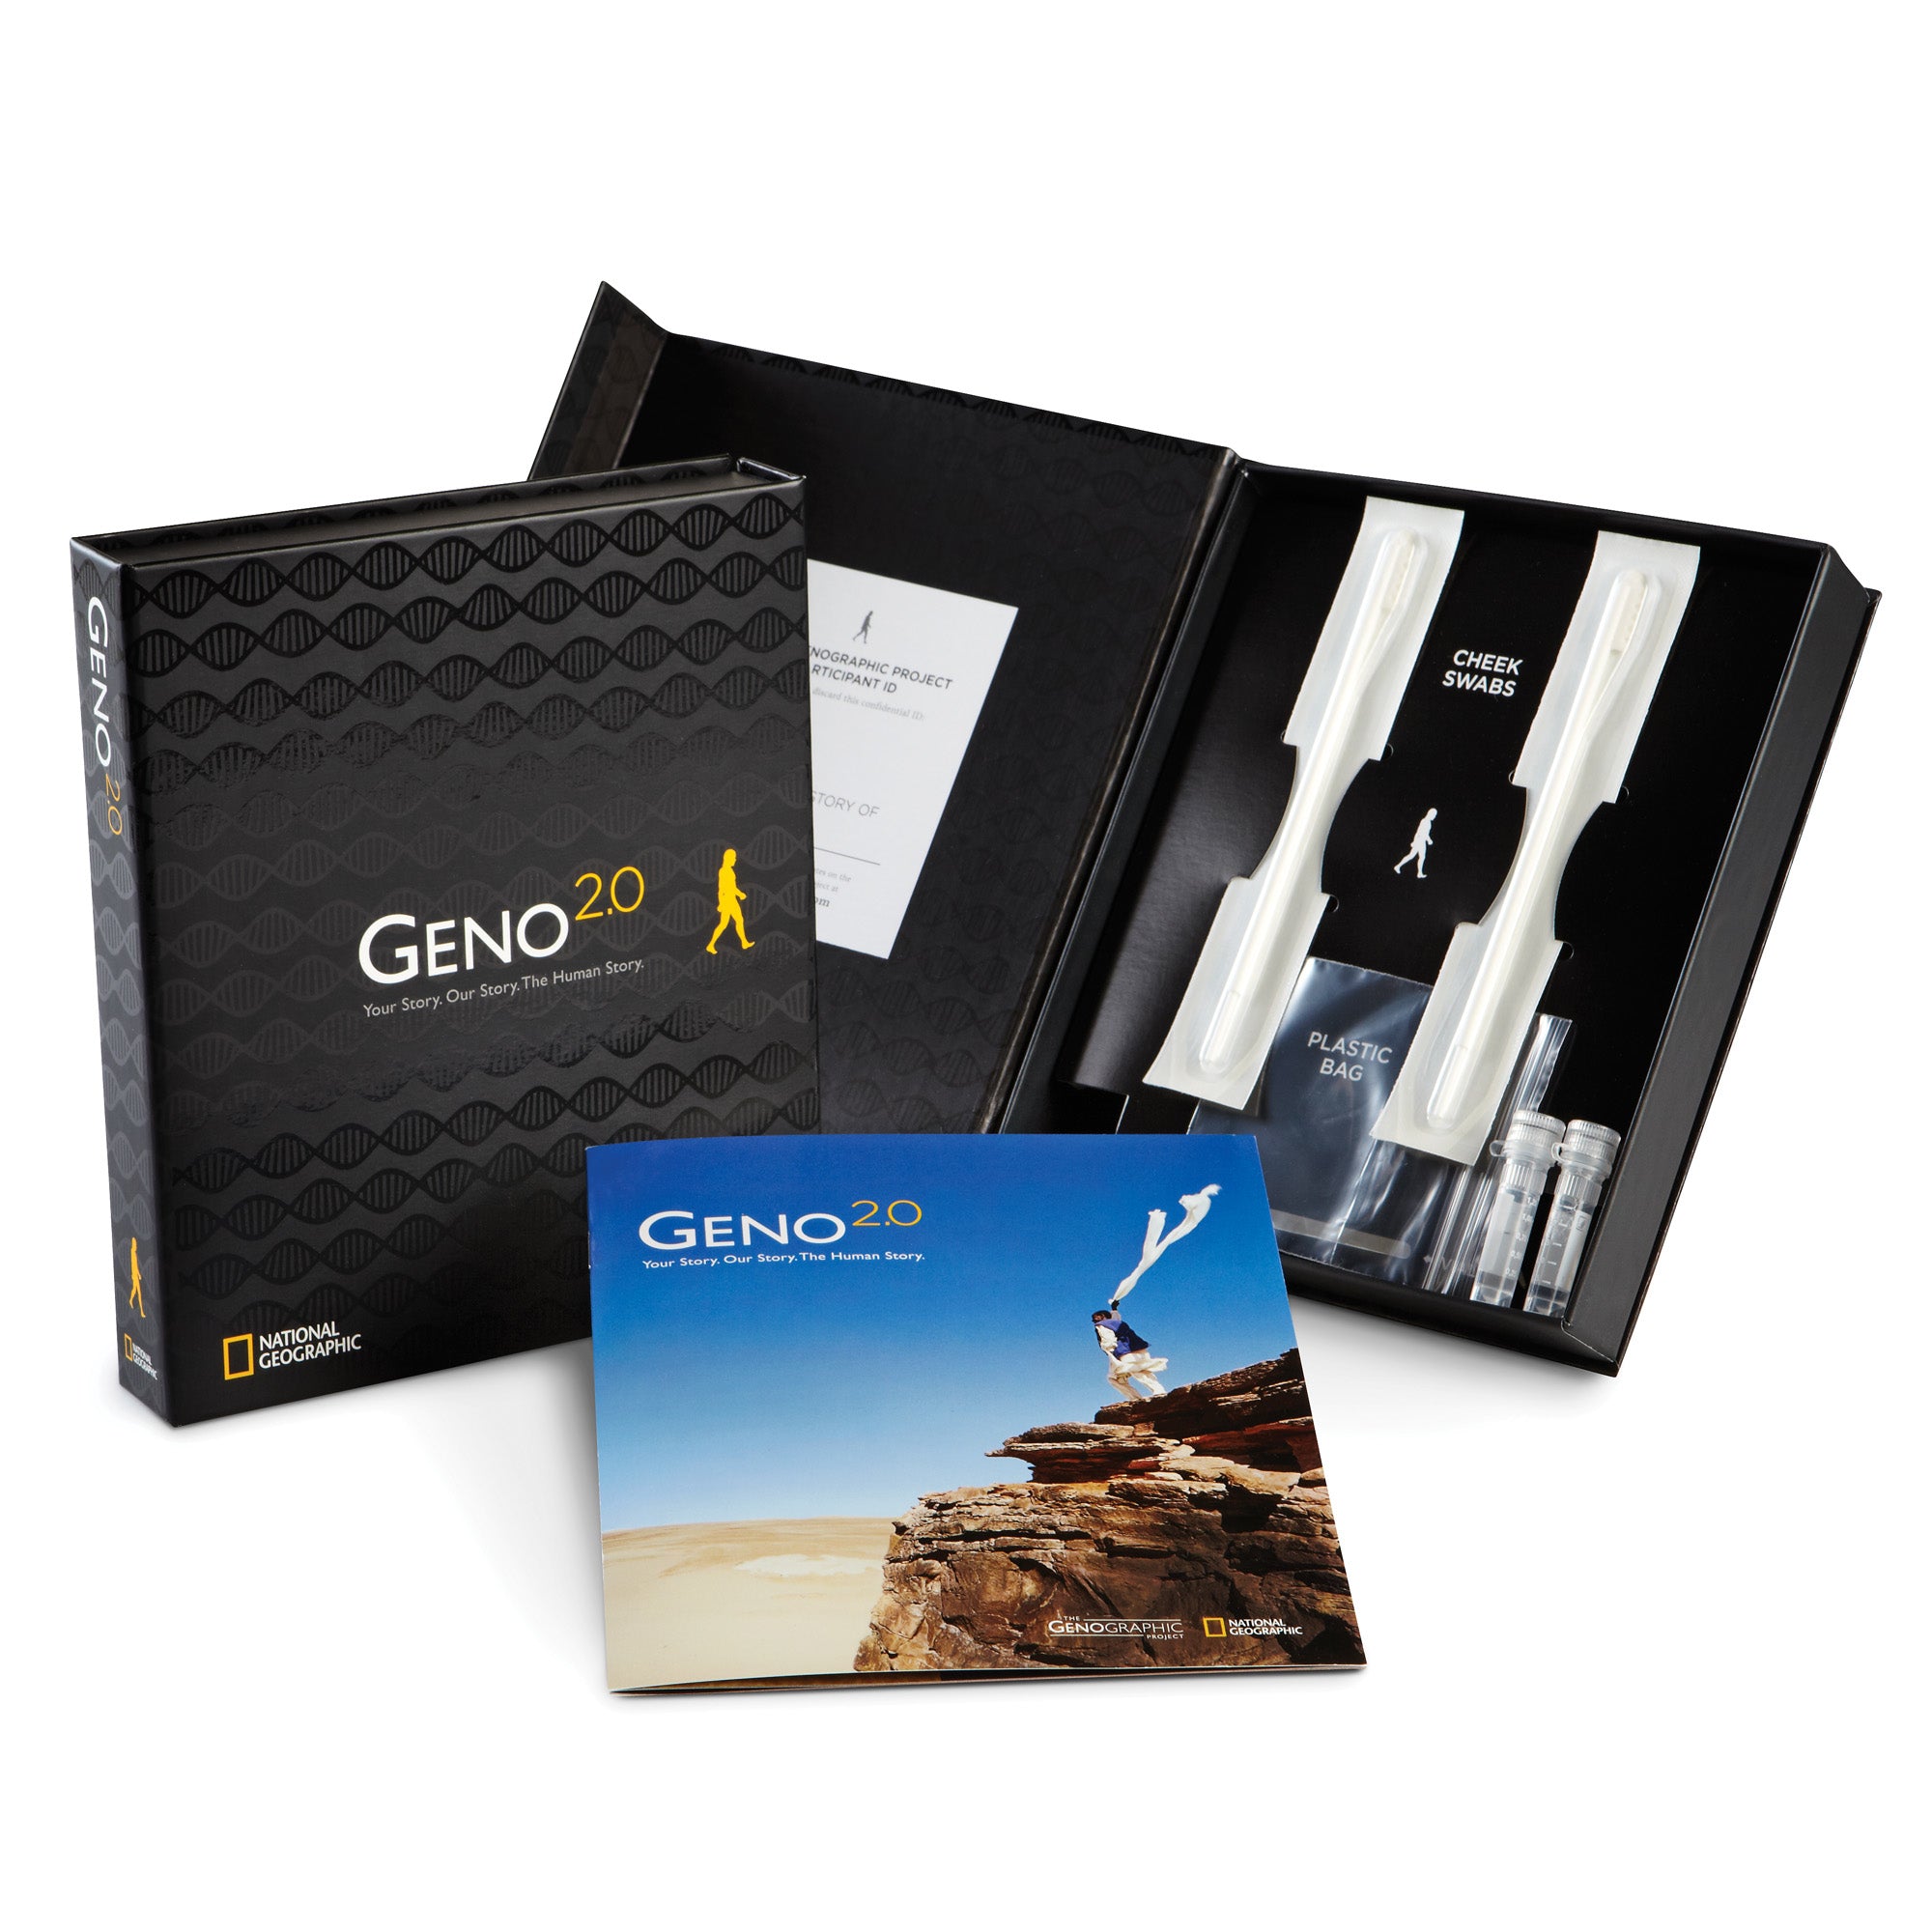 National Geographic Genographic Ancestry DNA Kit - great gift idea for history lovers - Stylish Spoon 2013 Holiday Gift Guide